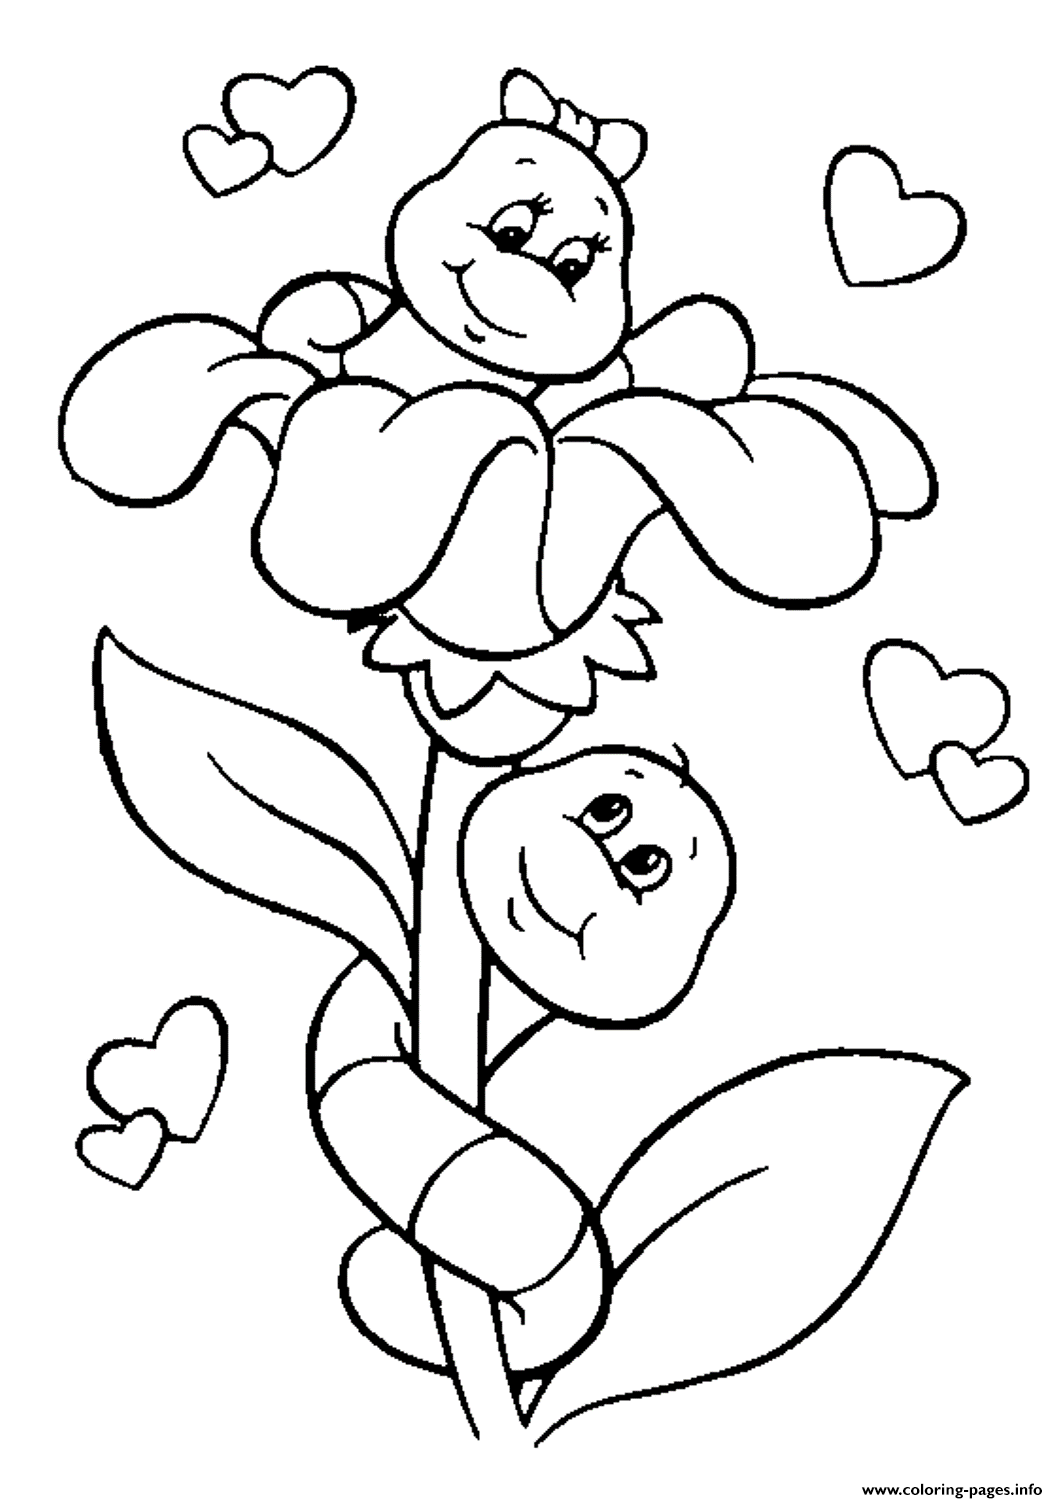 Flower And Caterpillar In Love Valentine S9195 coloring